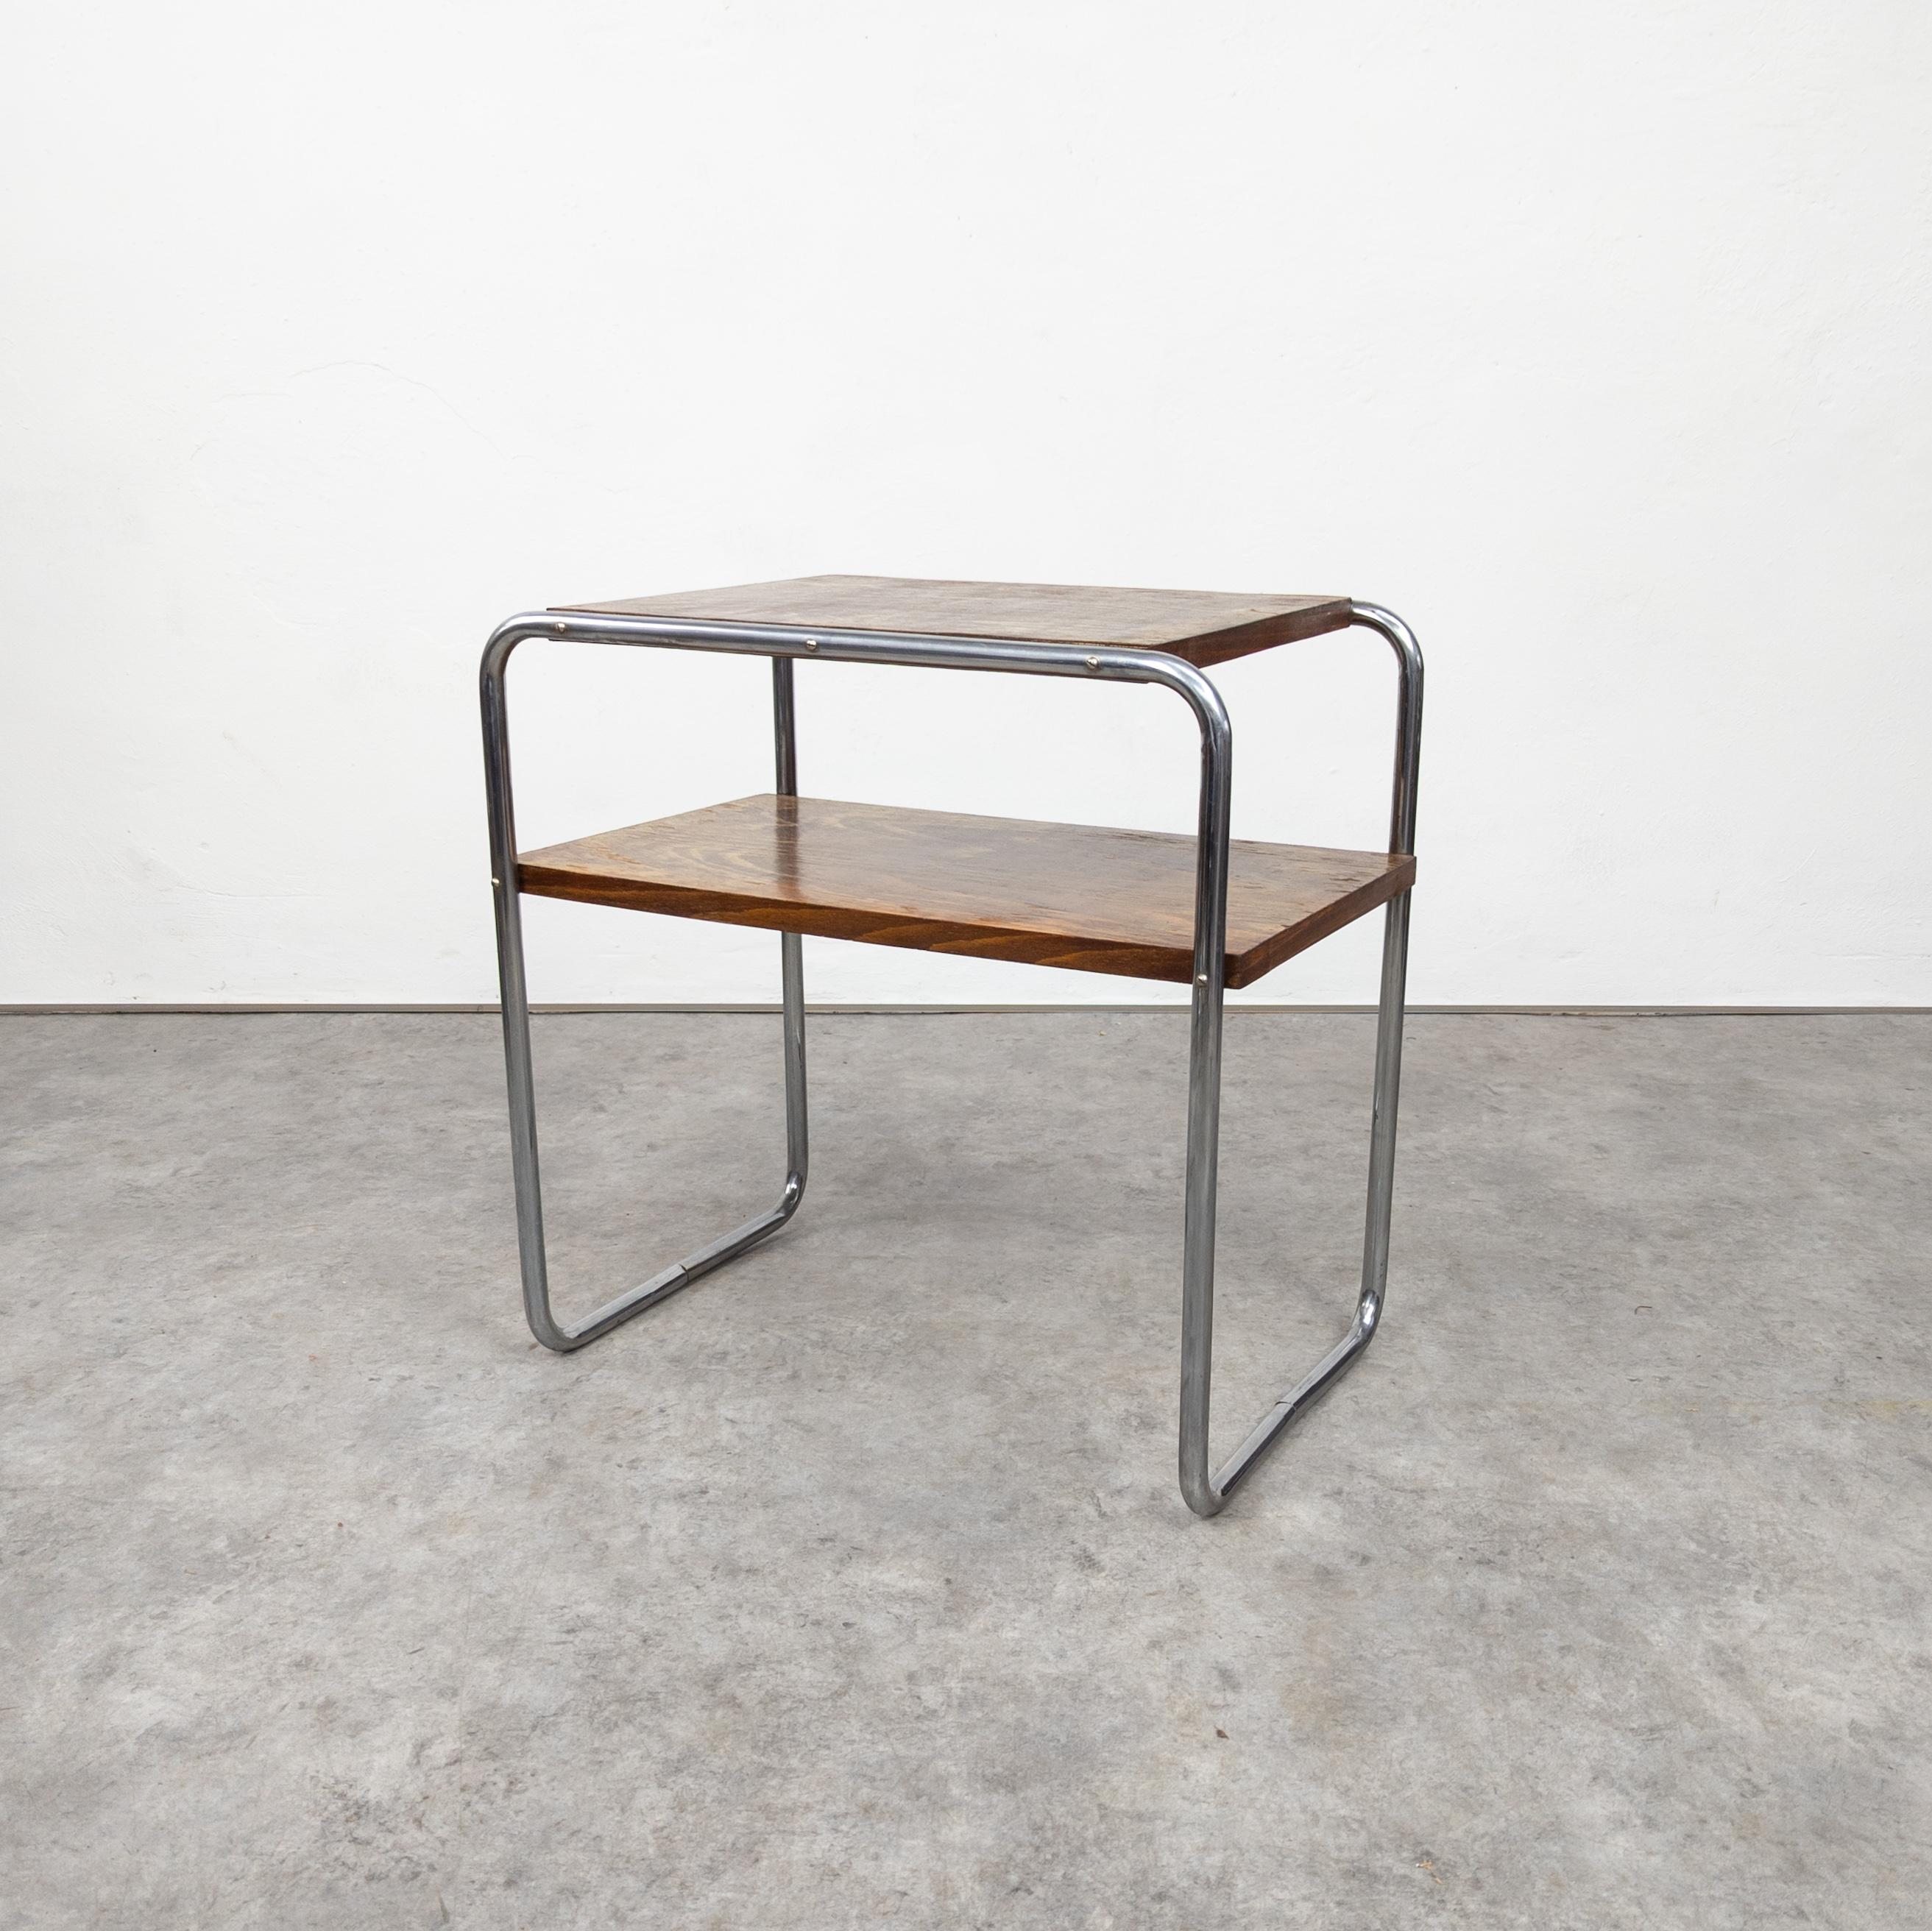 A side table with a platform stretcher, Model No. B 12, designed by Marcel Breuer in 1928,
manufactured under a Thonet licence by Robert Slezak c. 1930, chromium plated tubular steel construction, walnut veneered blockboard. 

Very good original